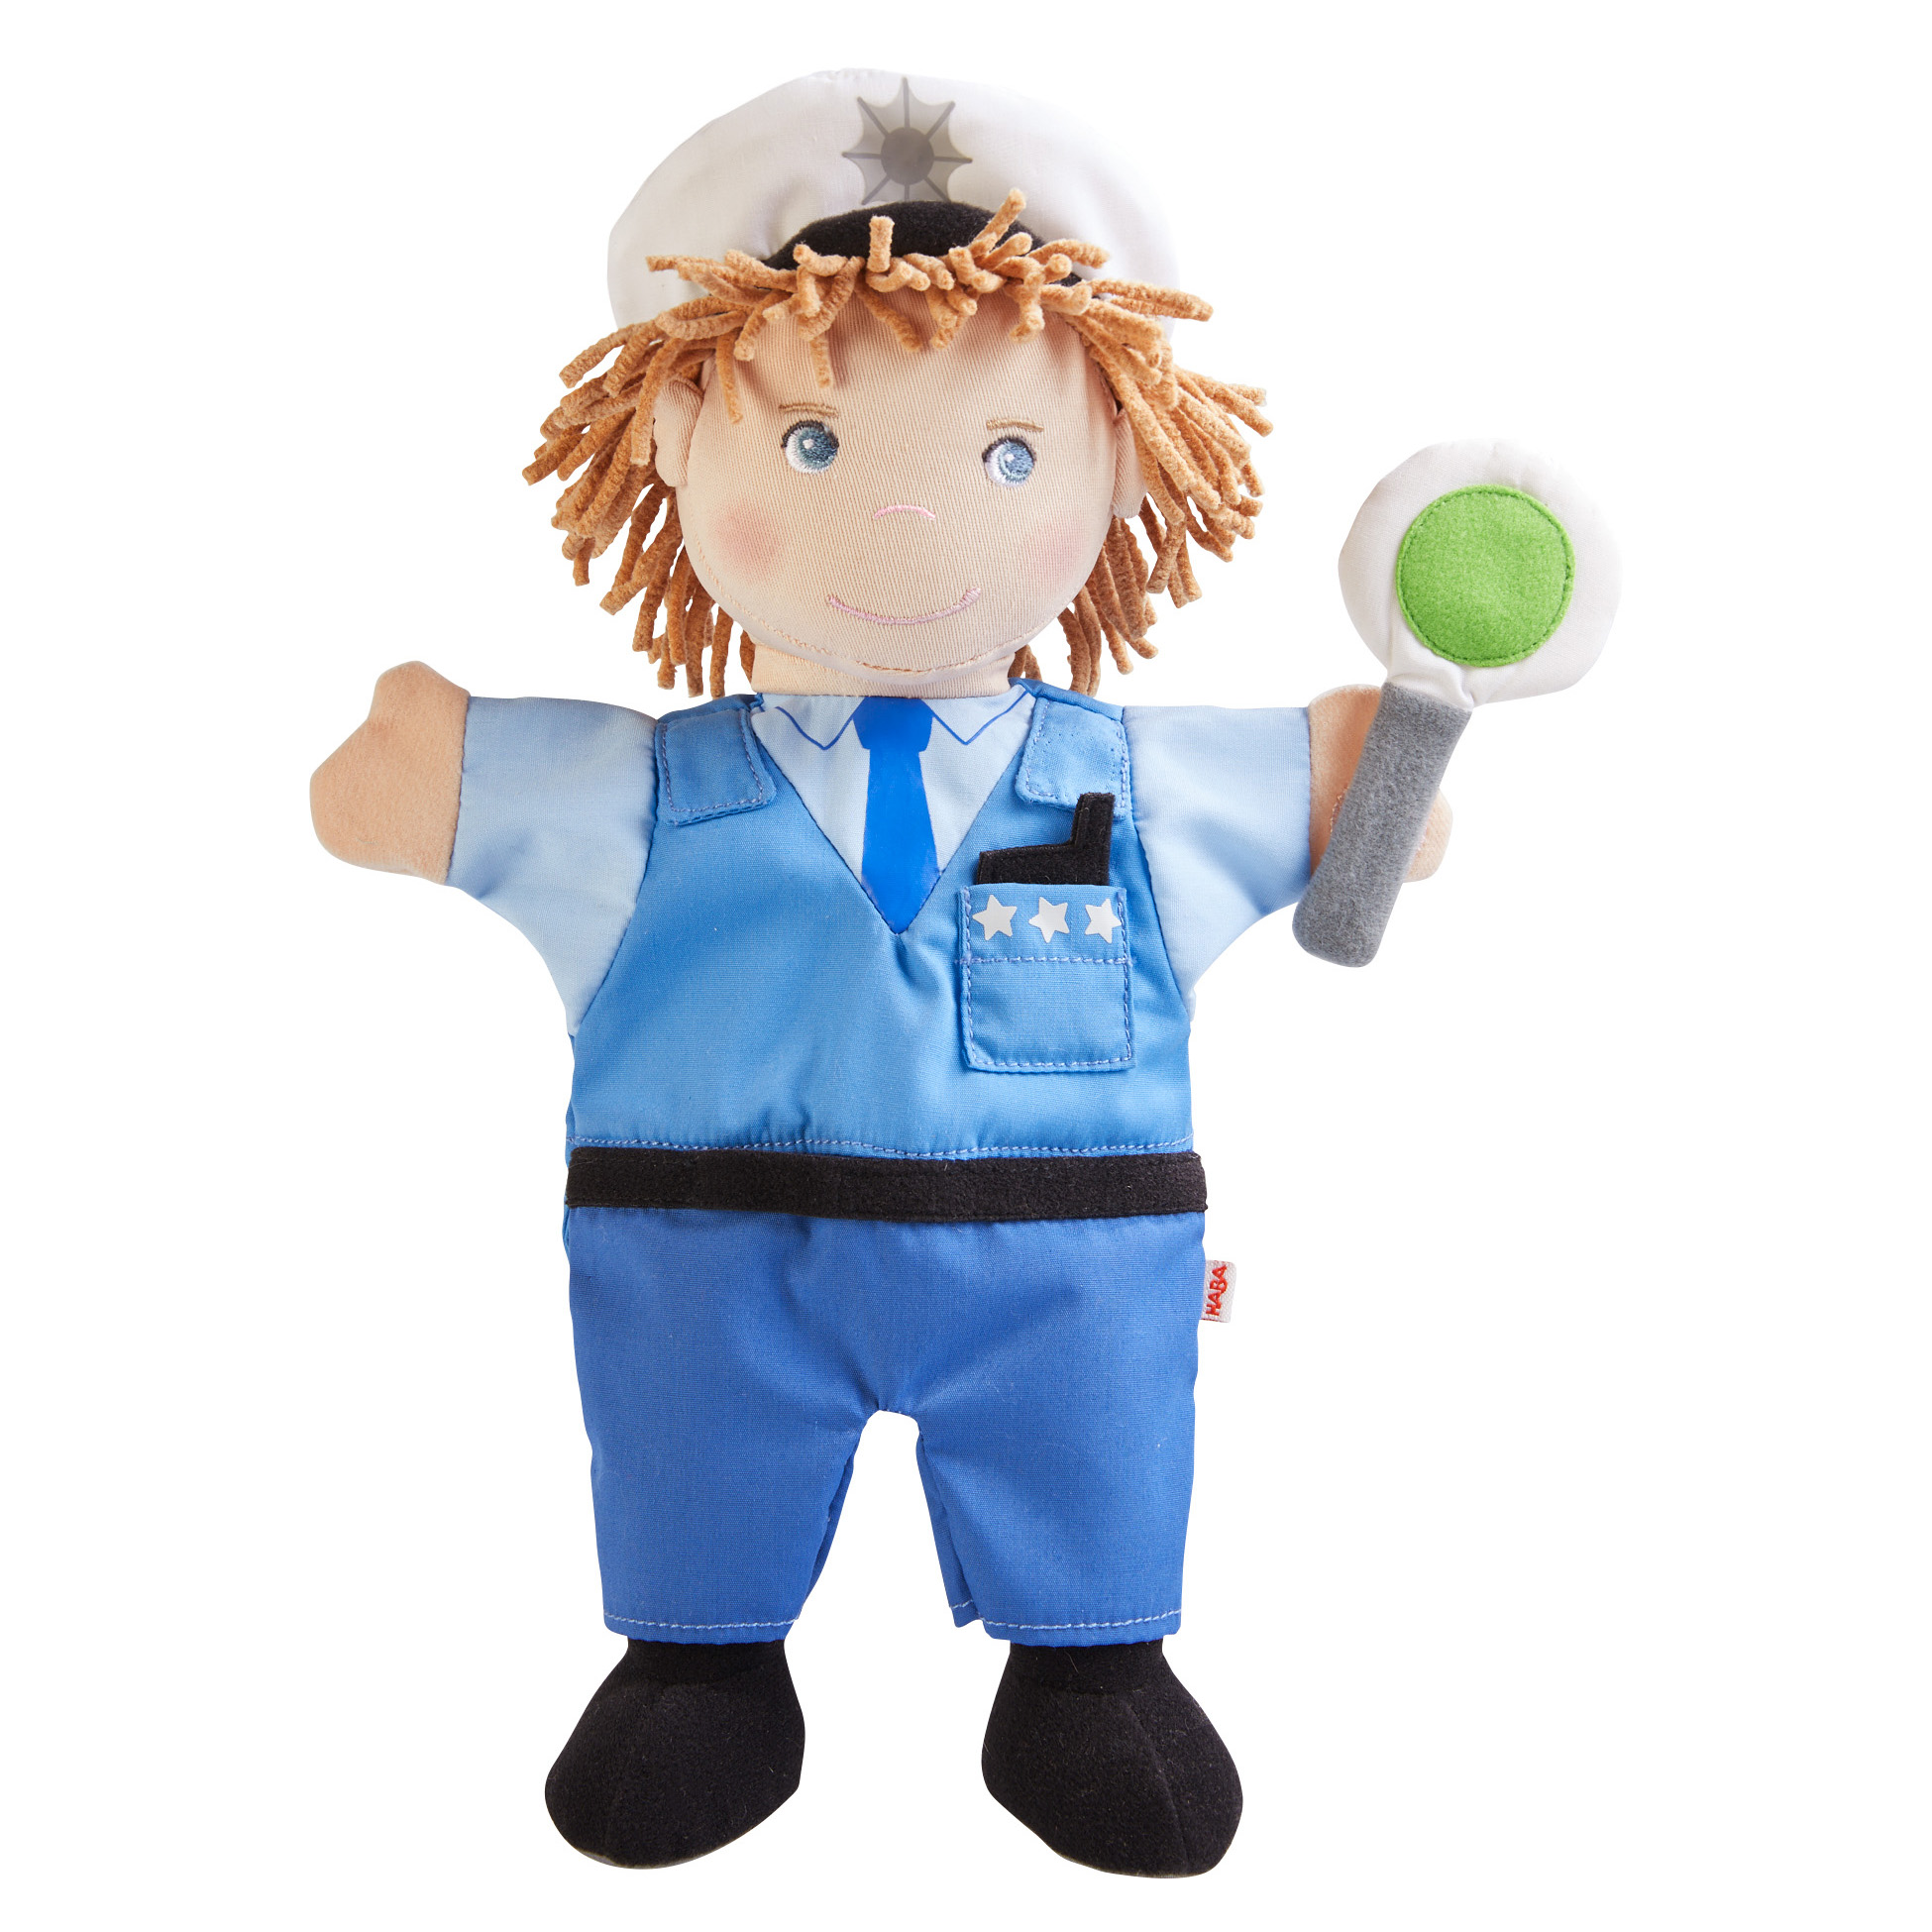 Policeman - hand puppet for babies by HABA